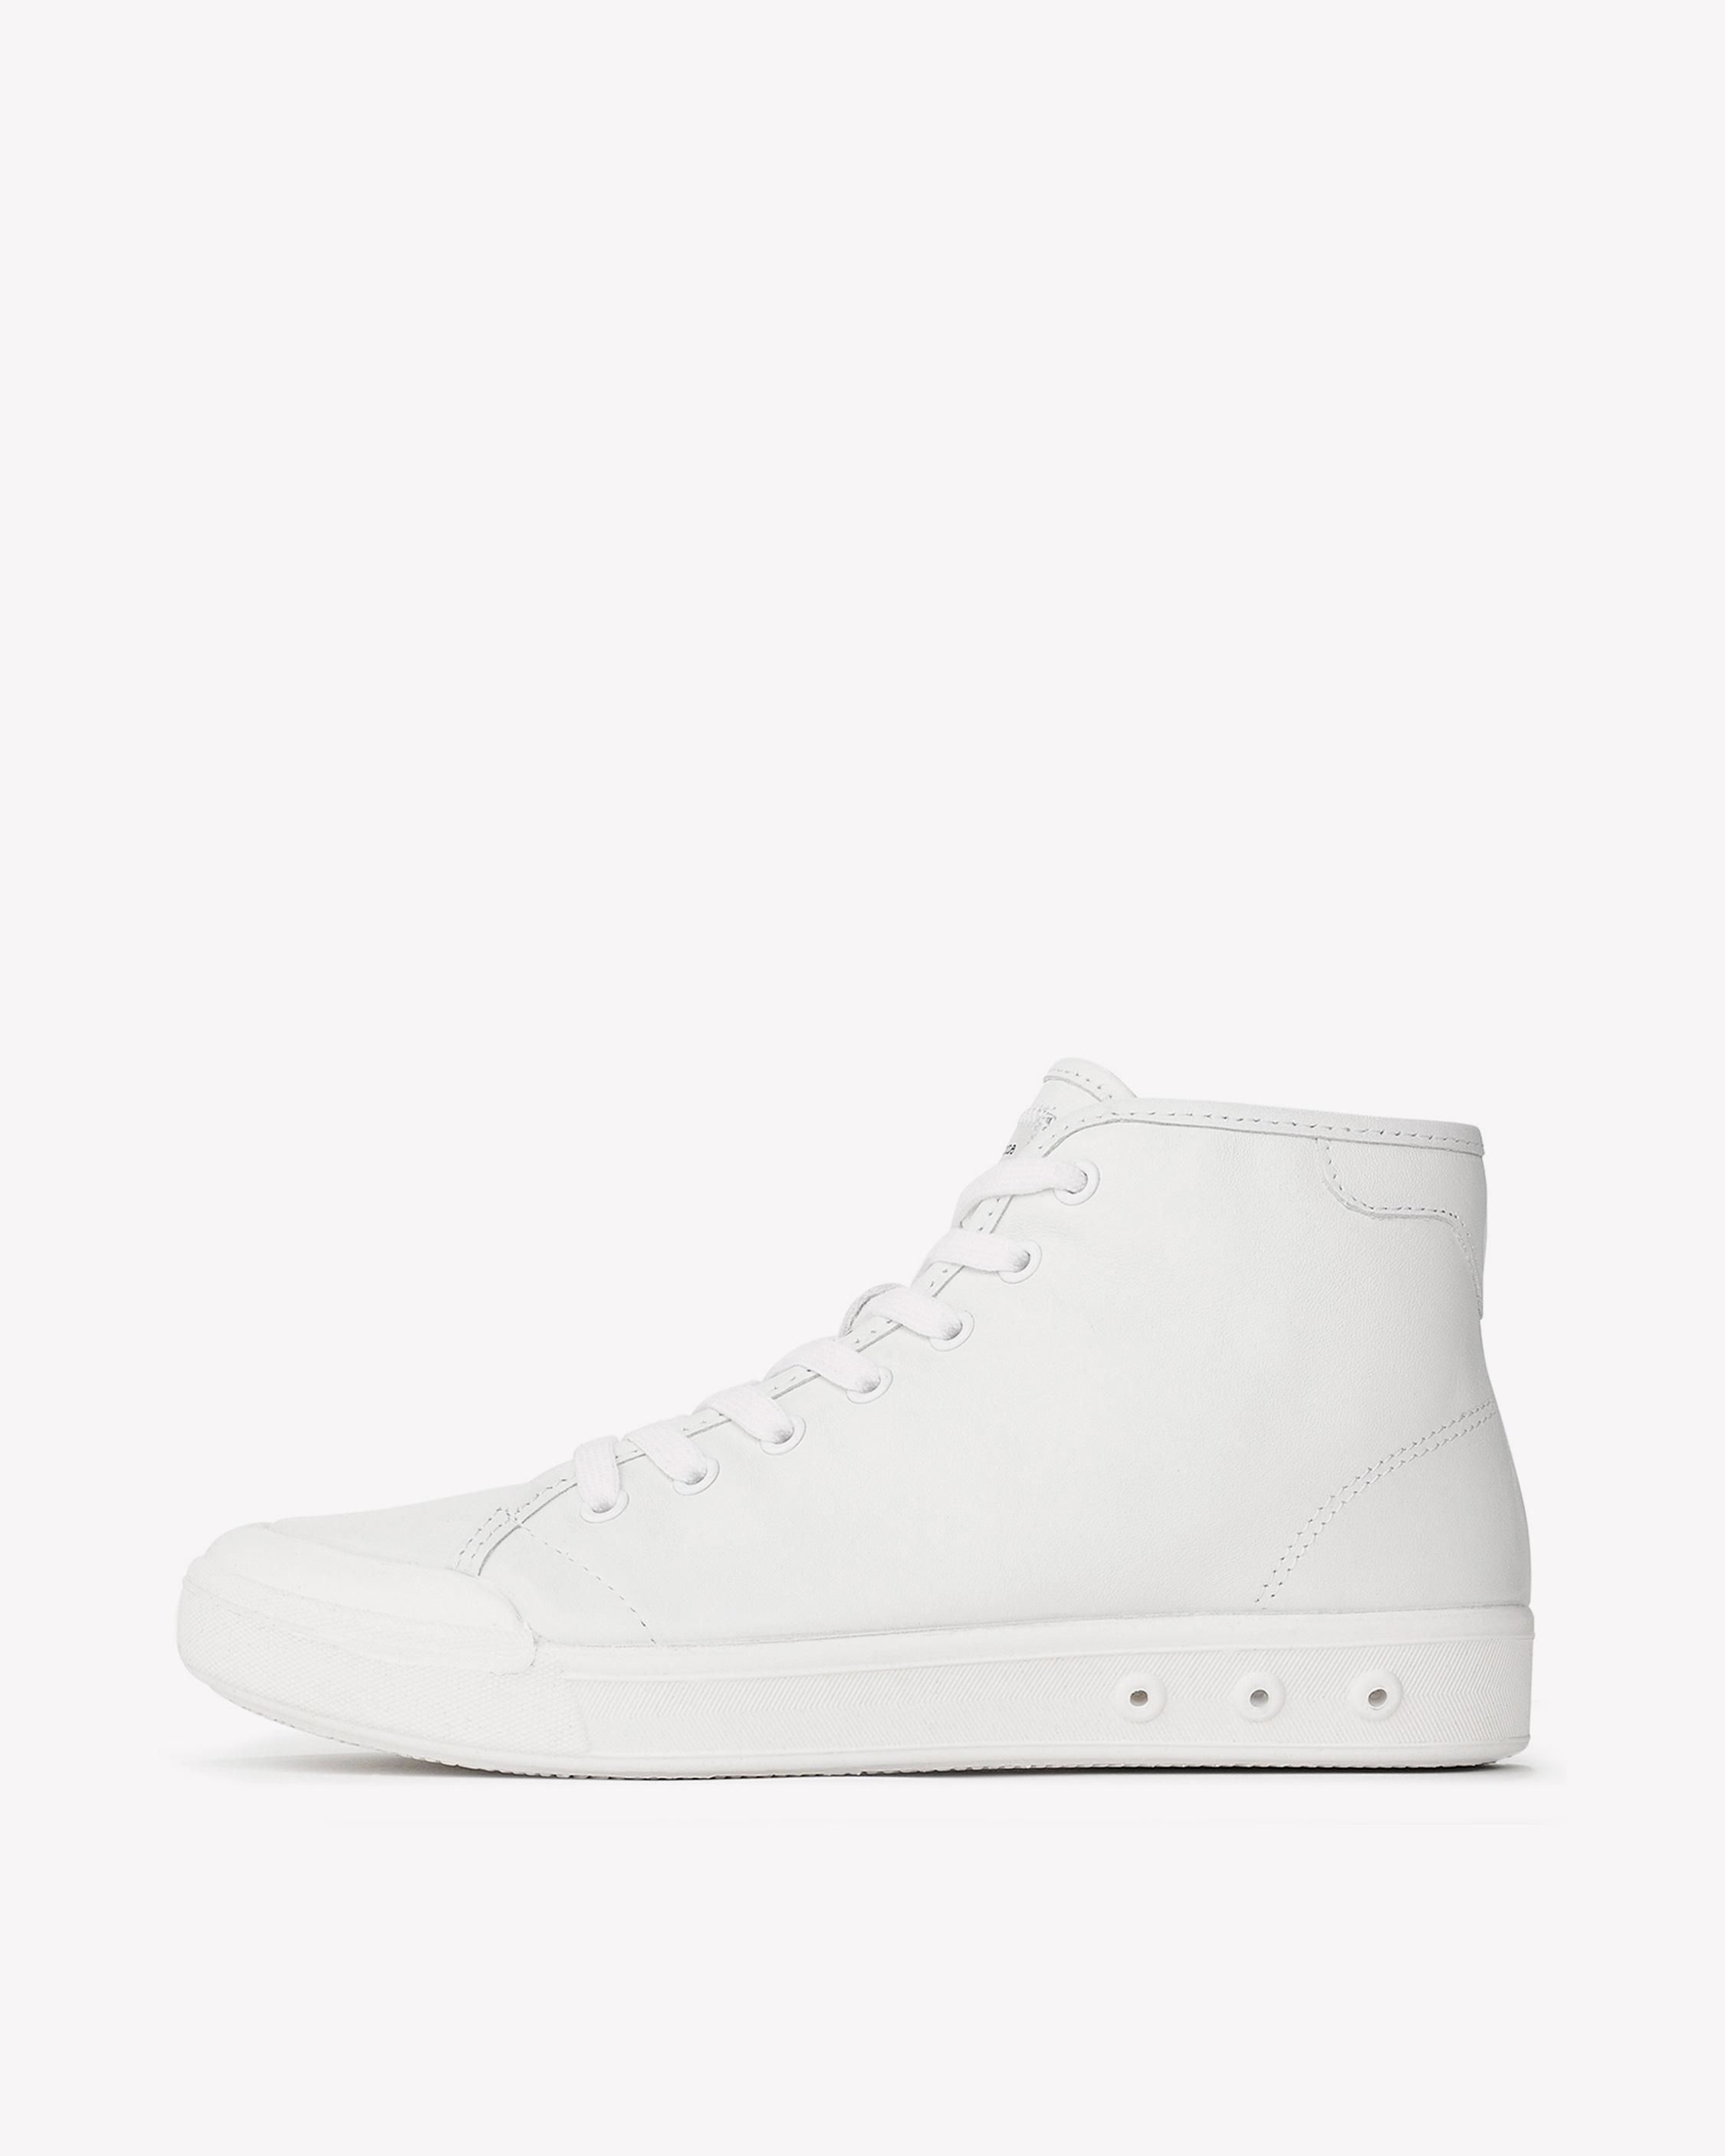 Sneakers: Perforated Suede to Black Leather in Iconic Urban Style | rag ...